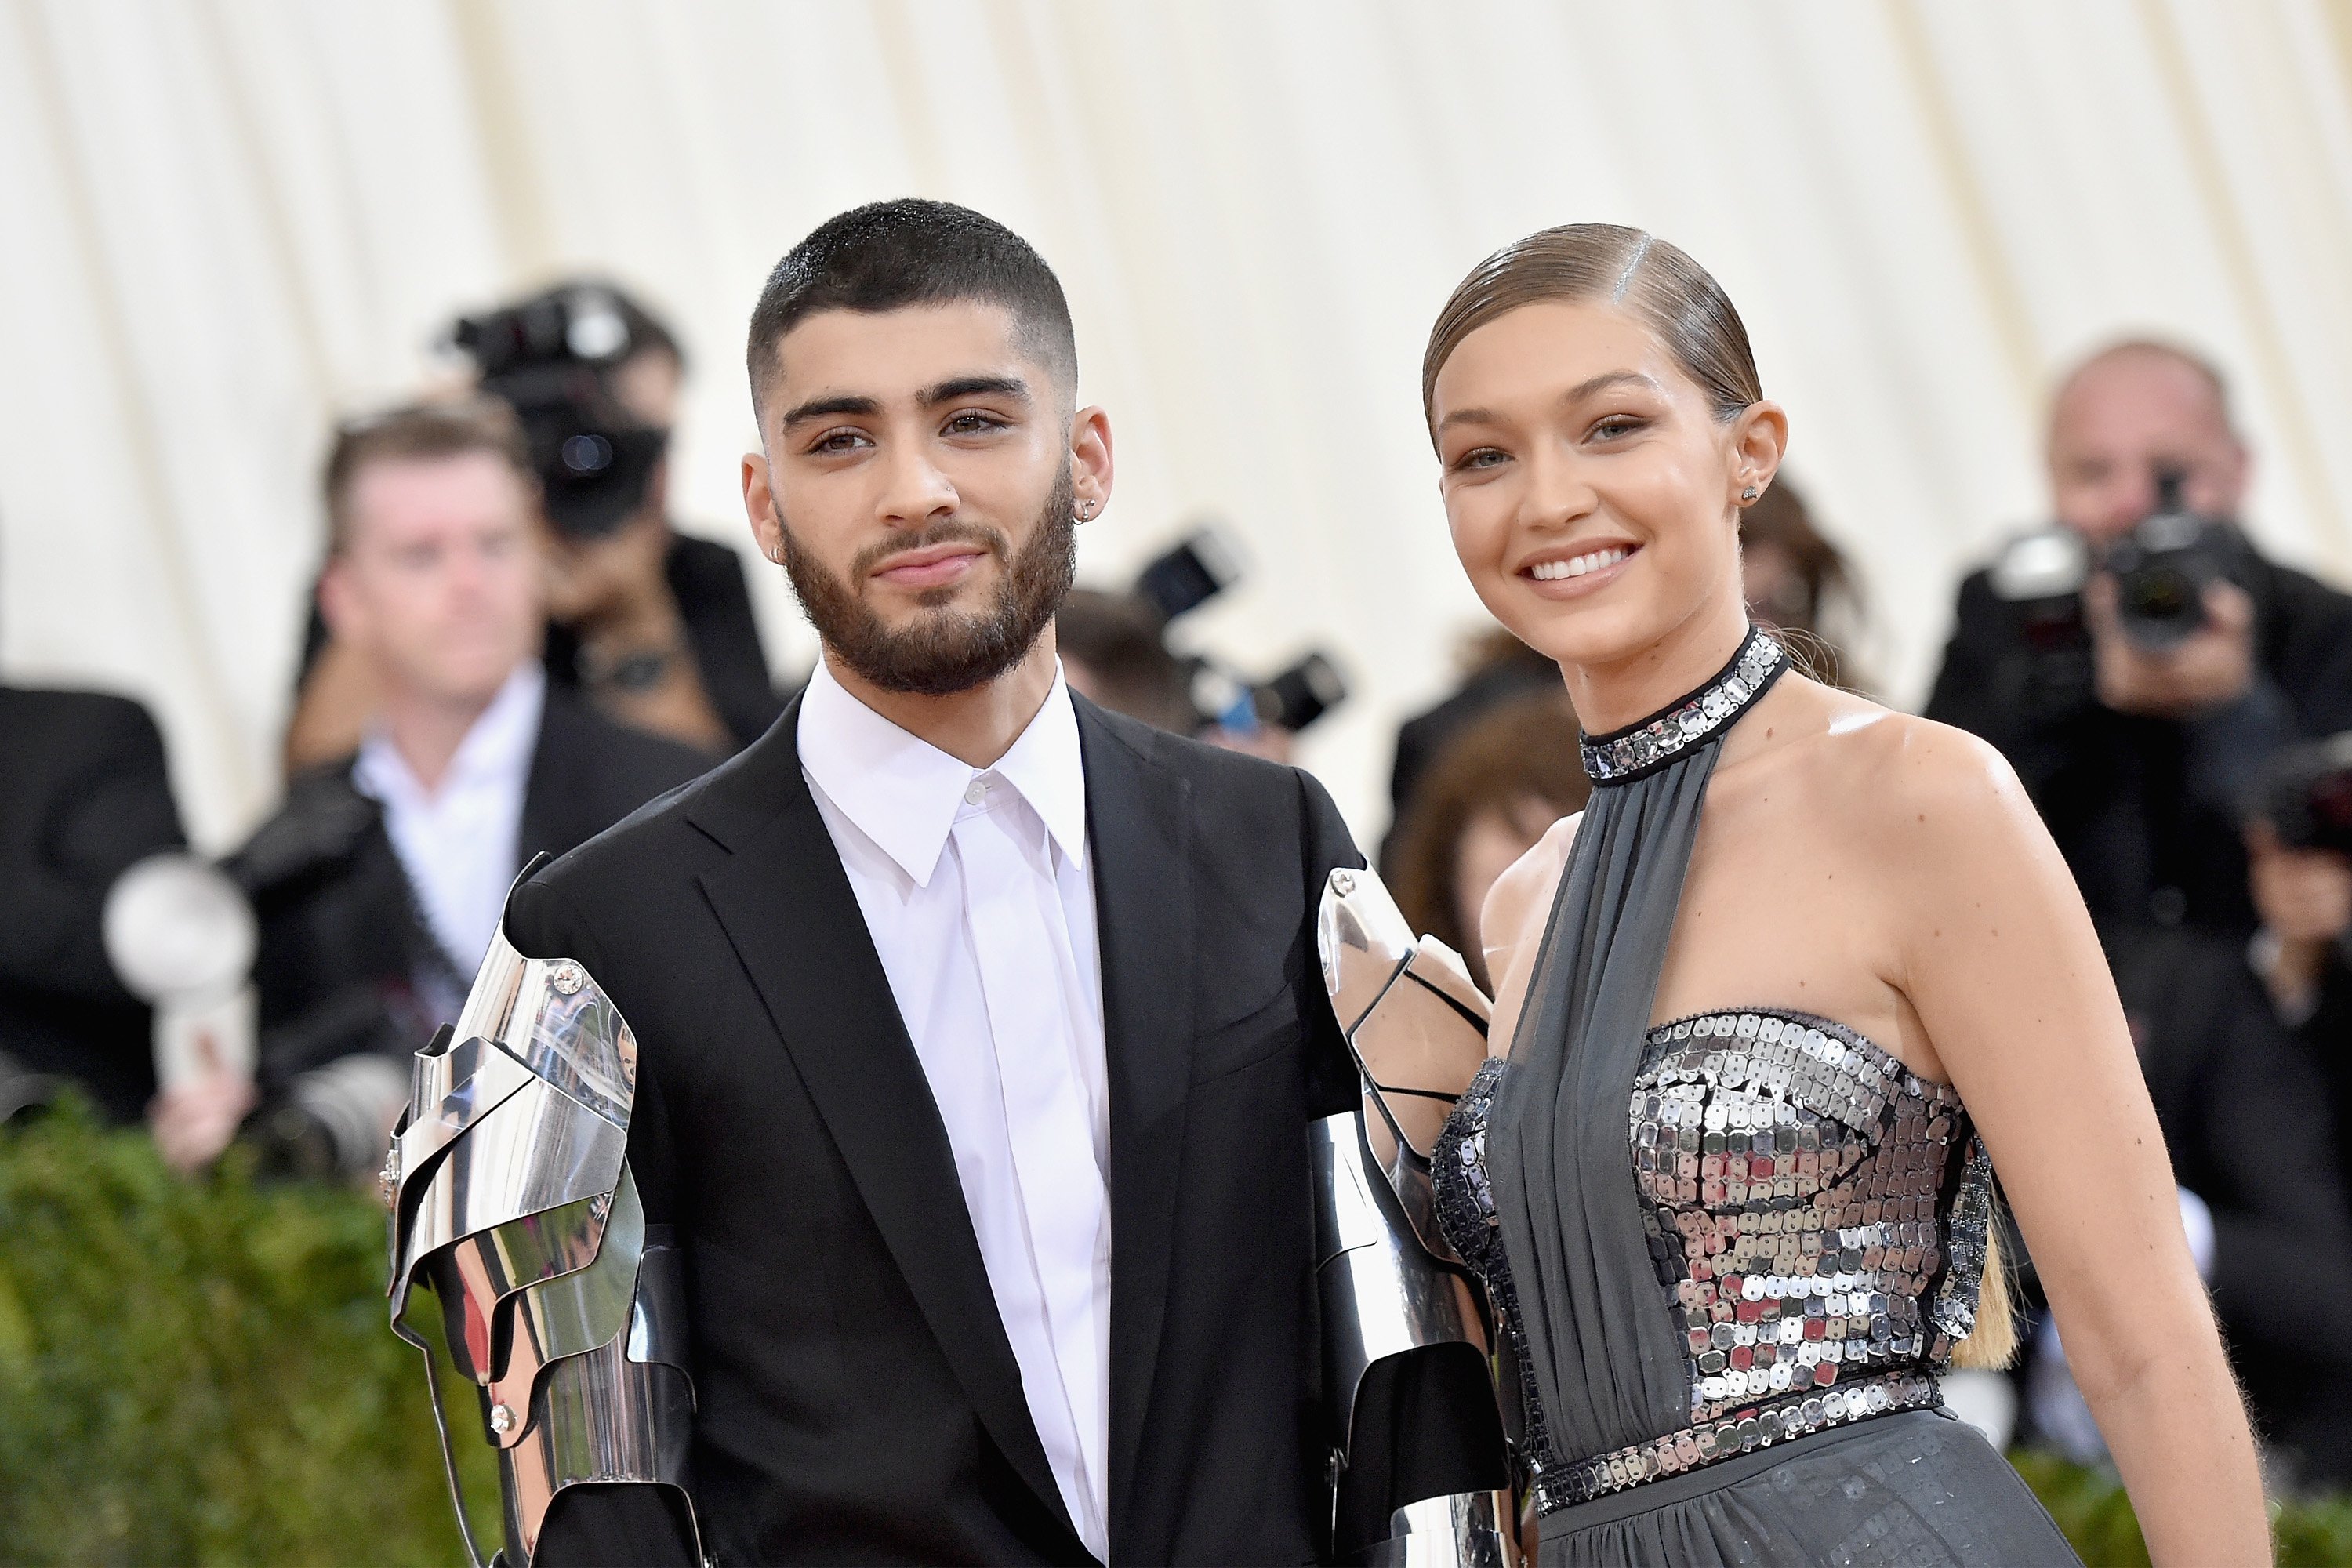 Zayn Malik and Gigi Hadid standing next to each other and smiling